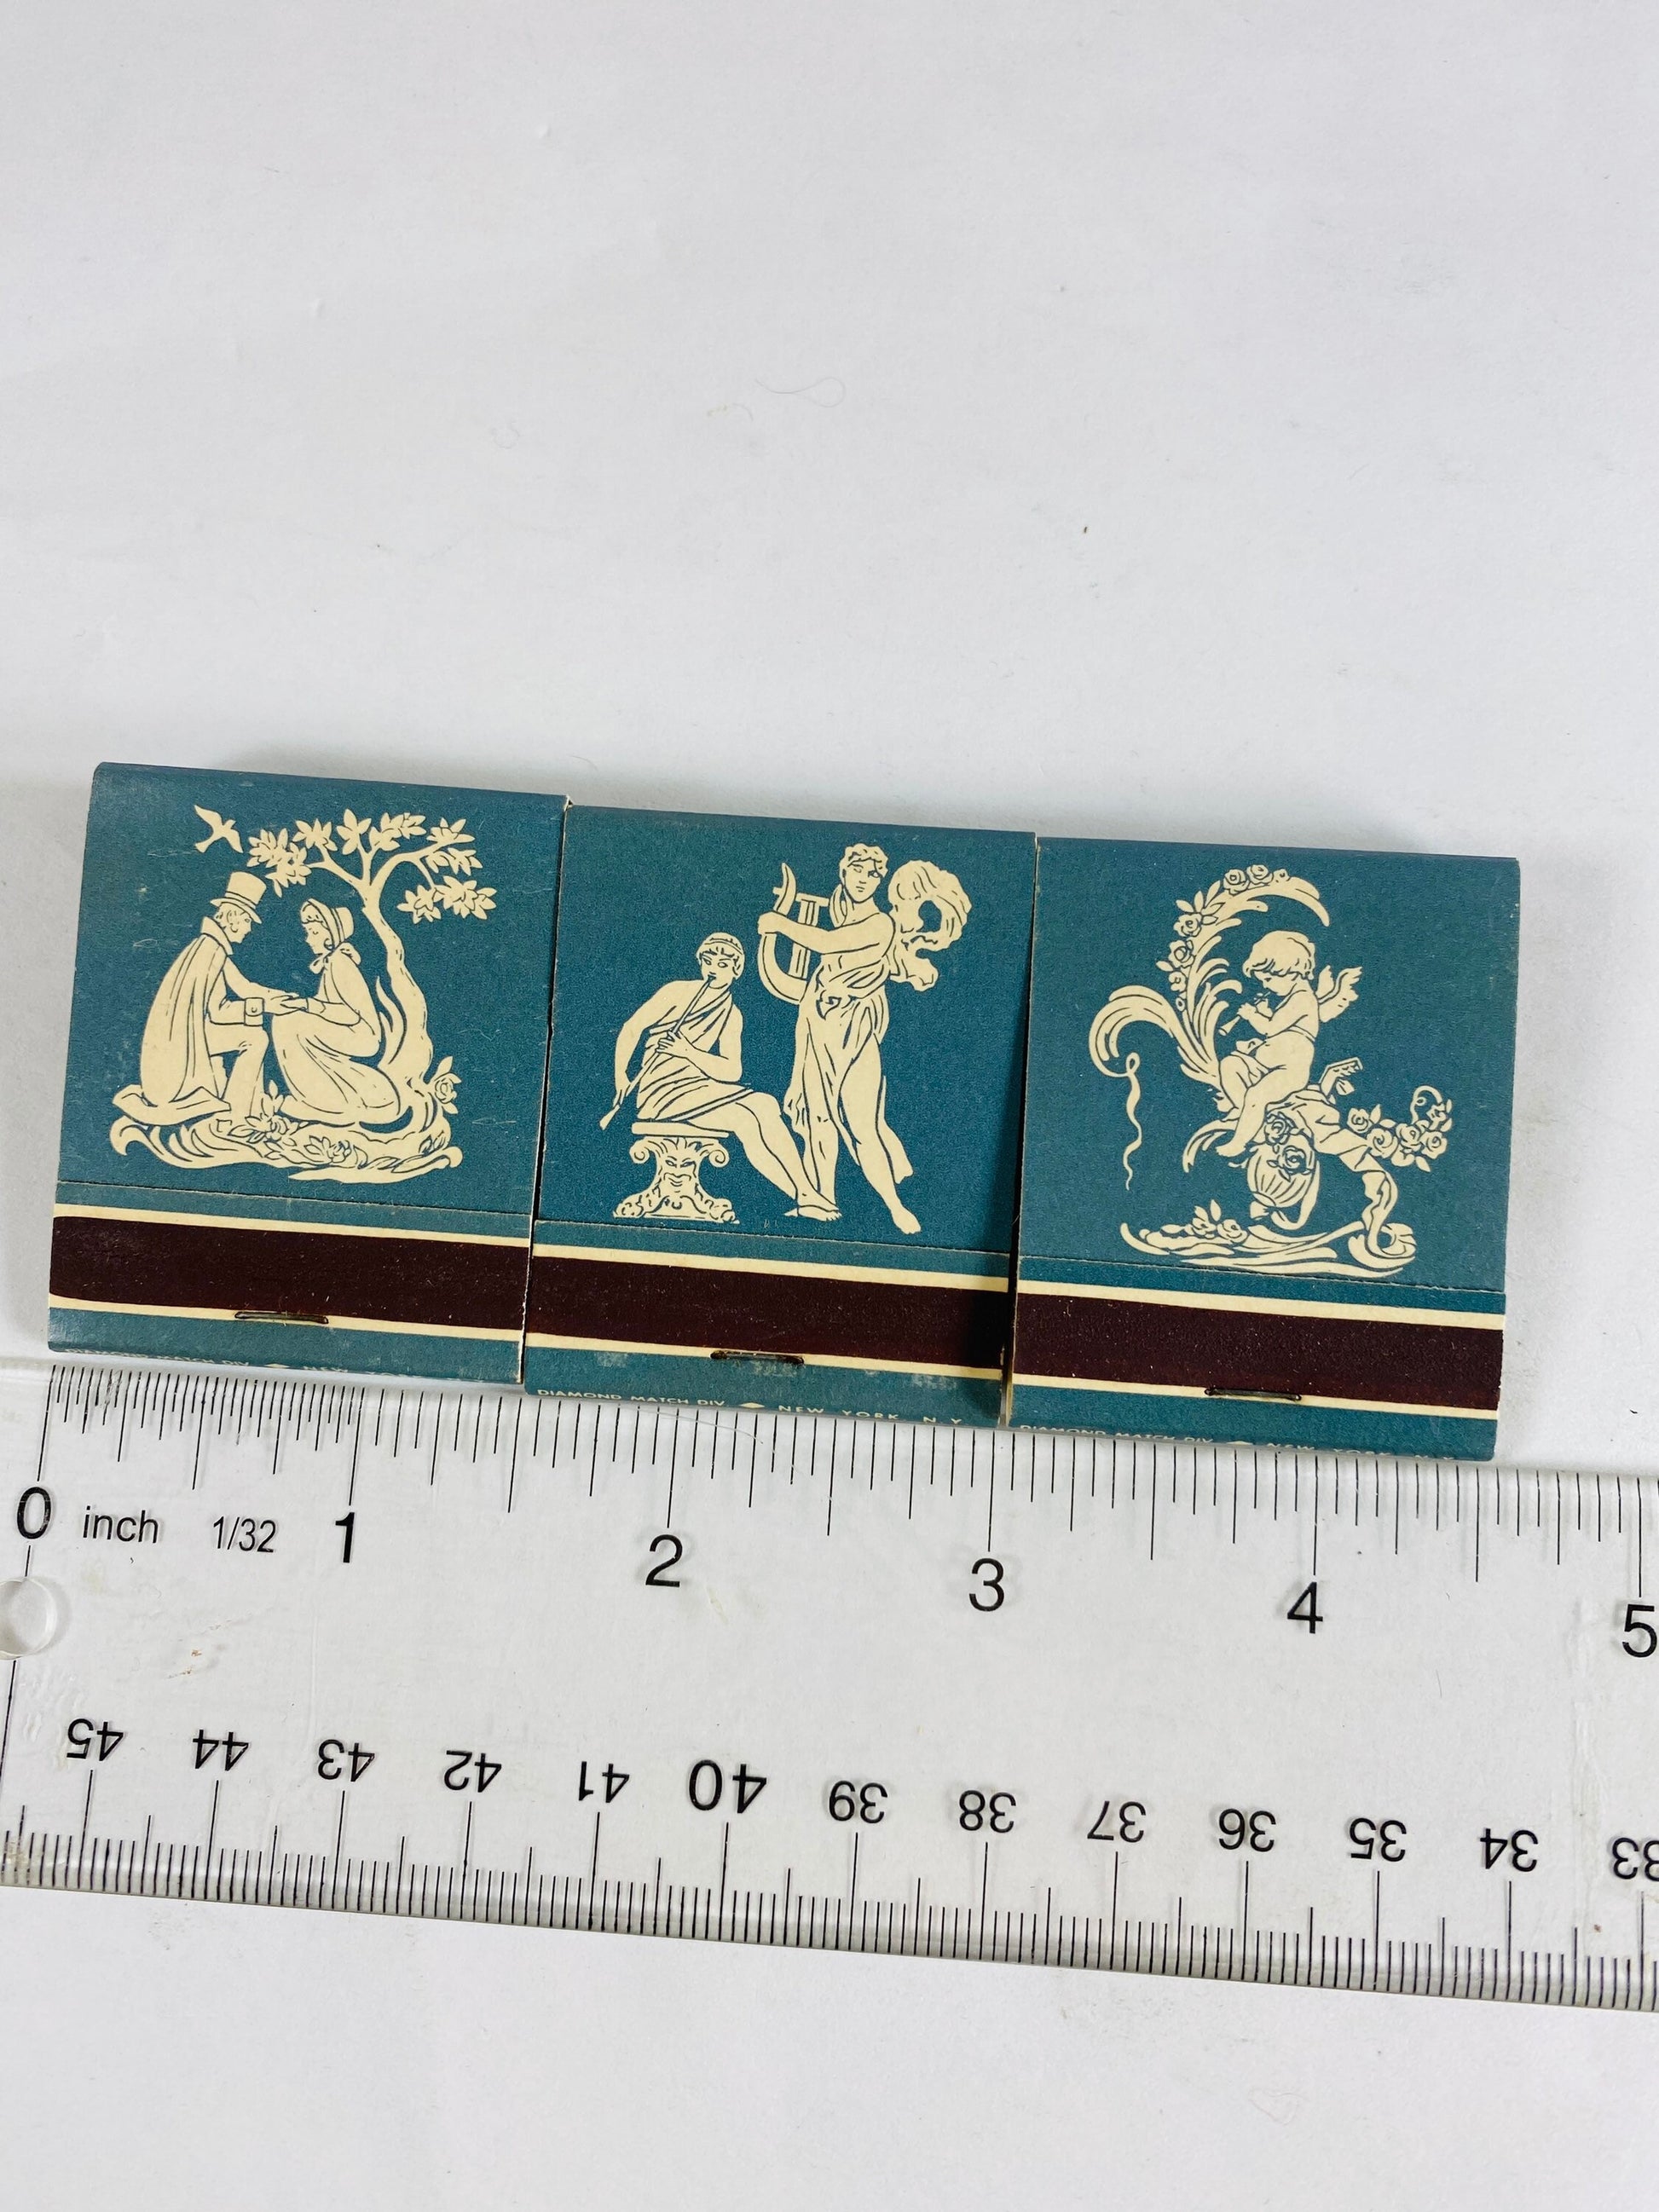 1970 Vintage Diamond Matches lot 3 UNUSED blue & white angelic cottagecore pocket sized Home decor gift candles lighter greek statues